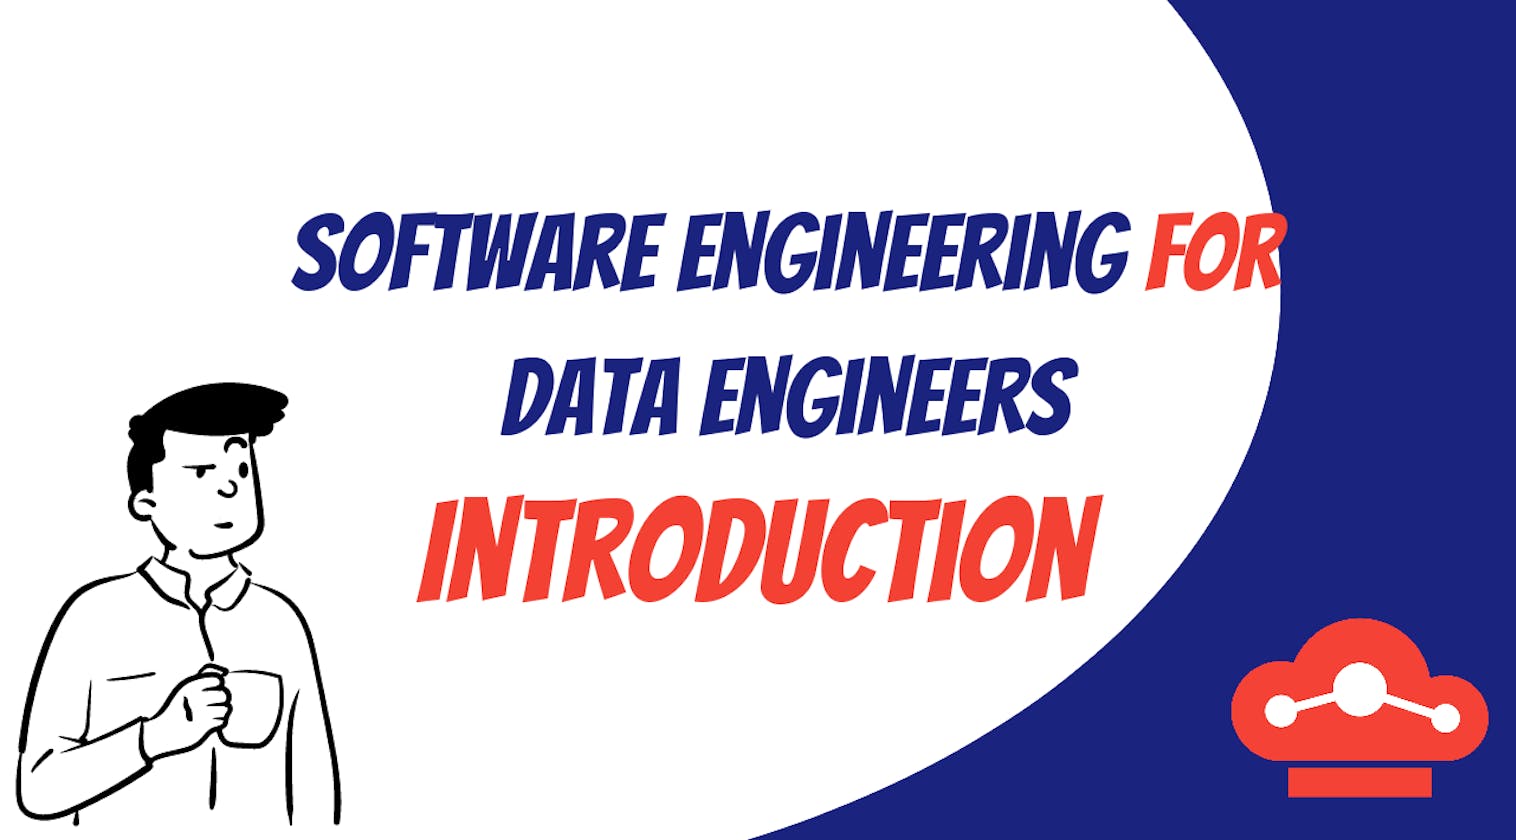 Software Engineering for Data Engineers: Introduction